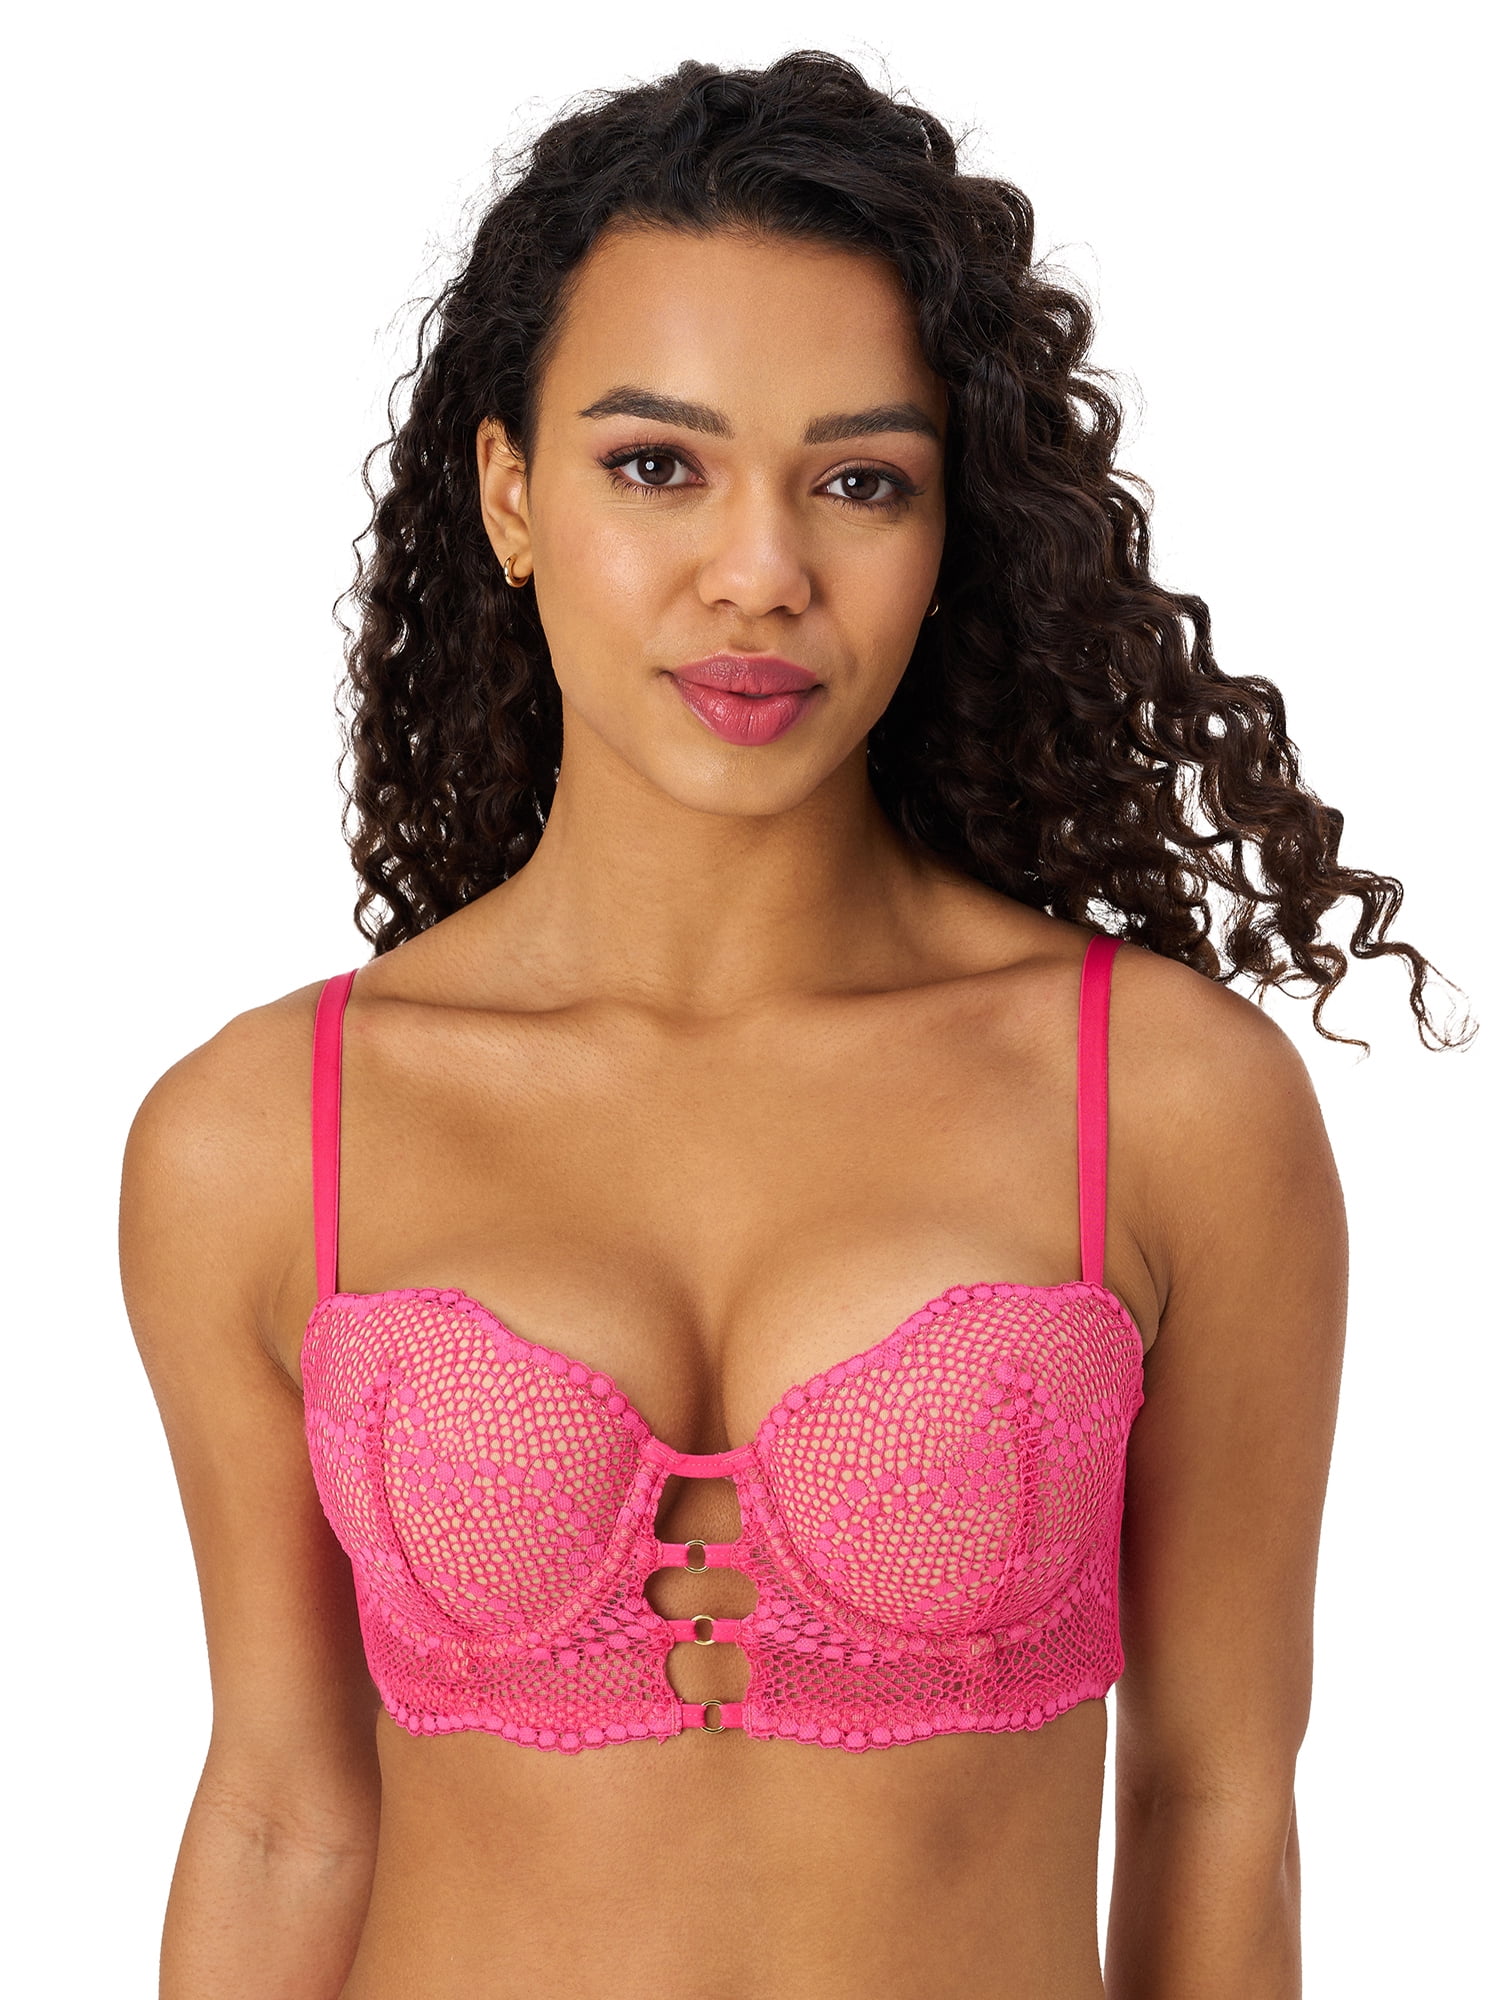 Adored by Adore Me Women's Morgan Natural Lift Lace Push Up